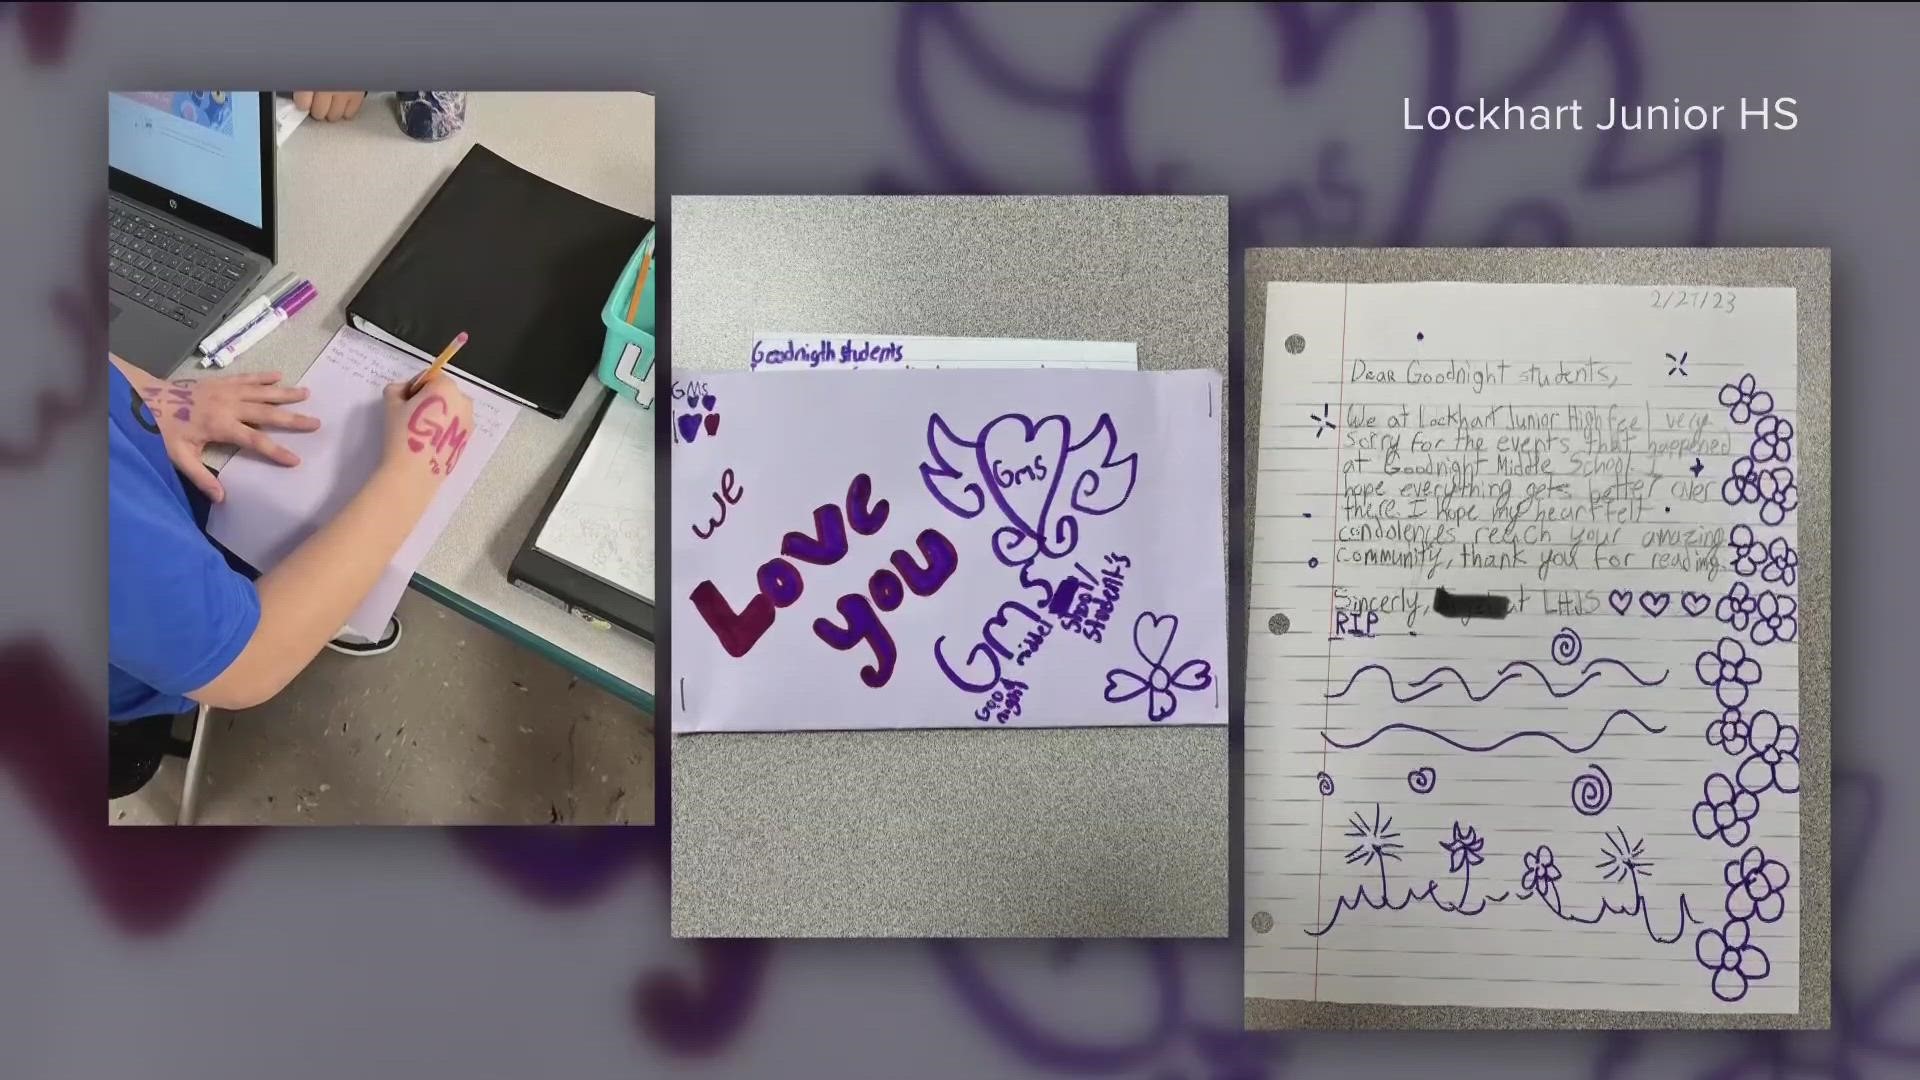 Almost a week after an 11-year-old child died in a traffic accident, students in the surrounding area are pouring out support to the San Marcos community.